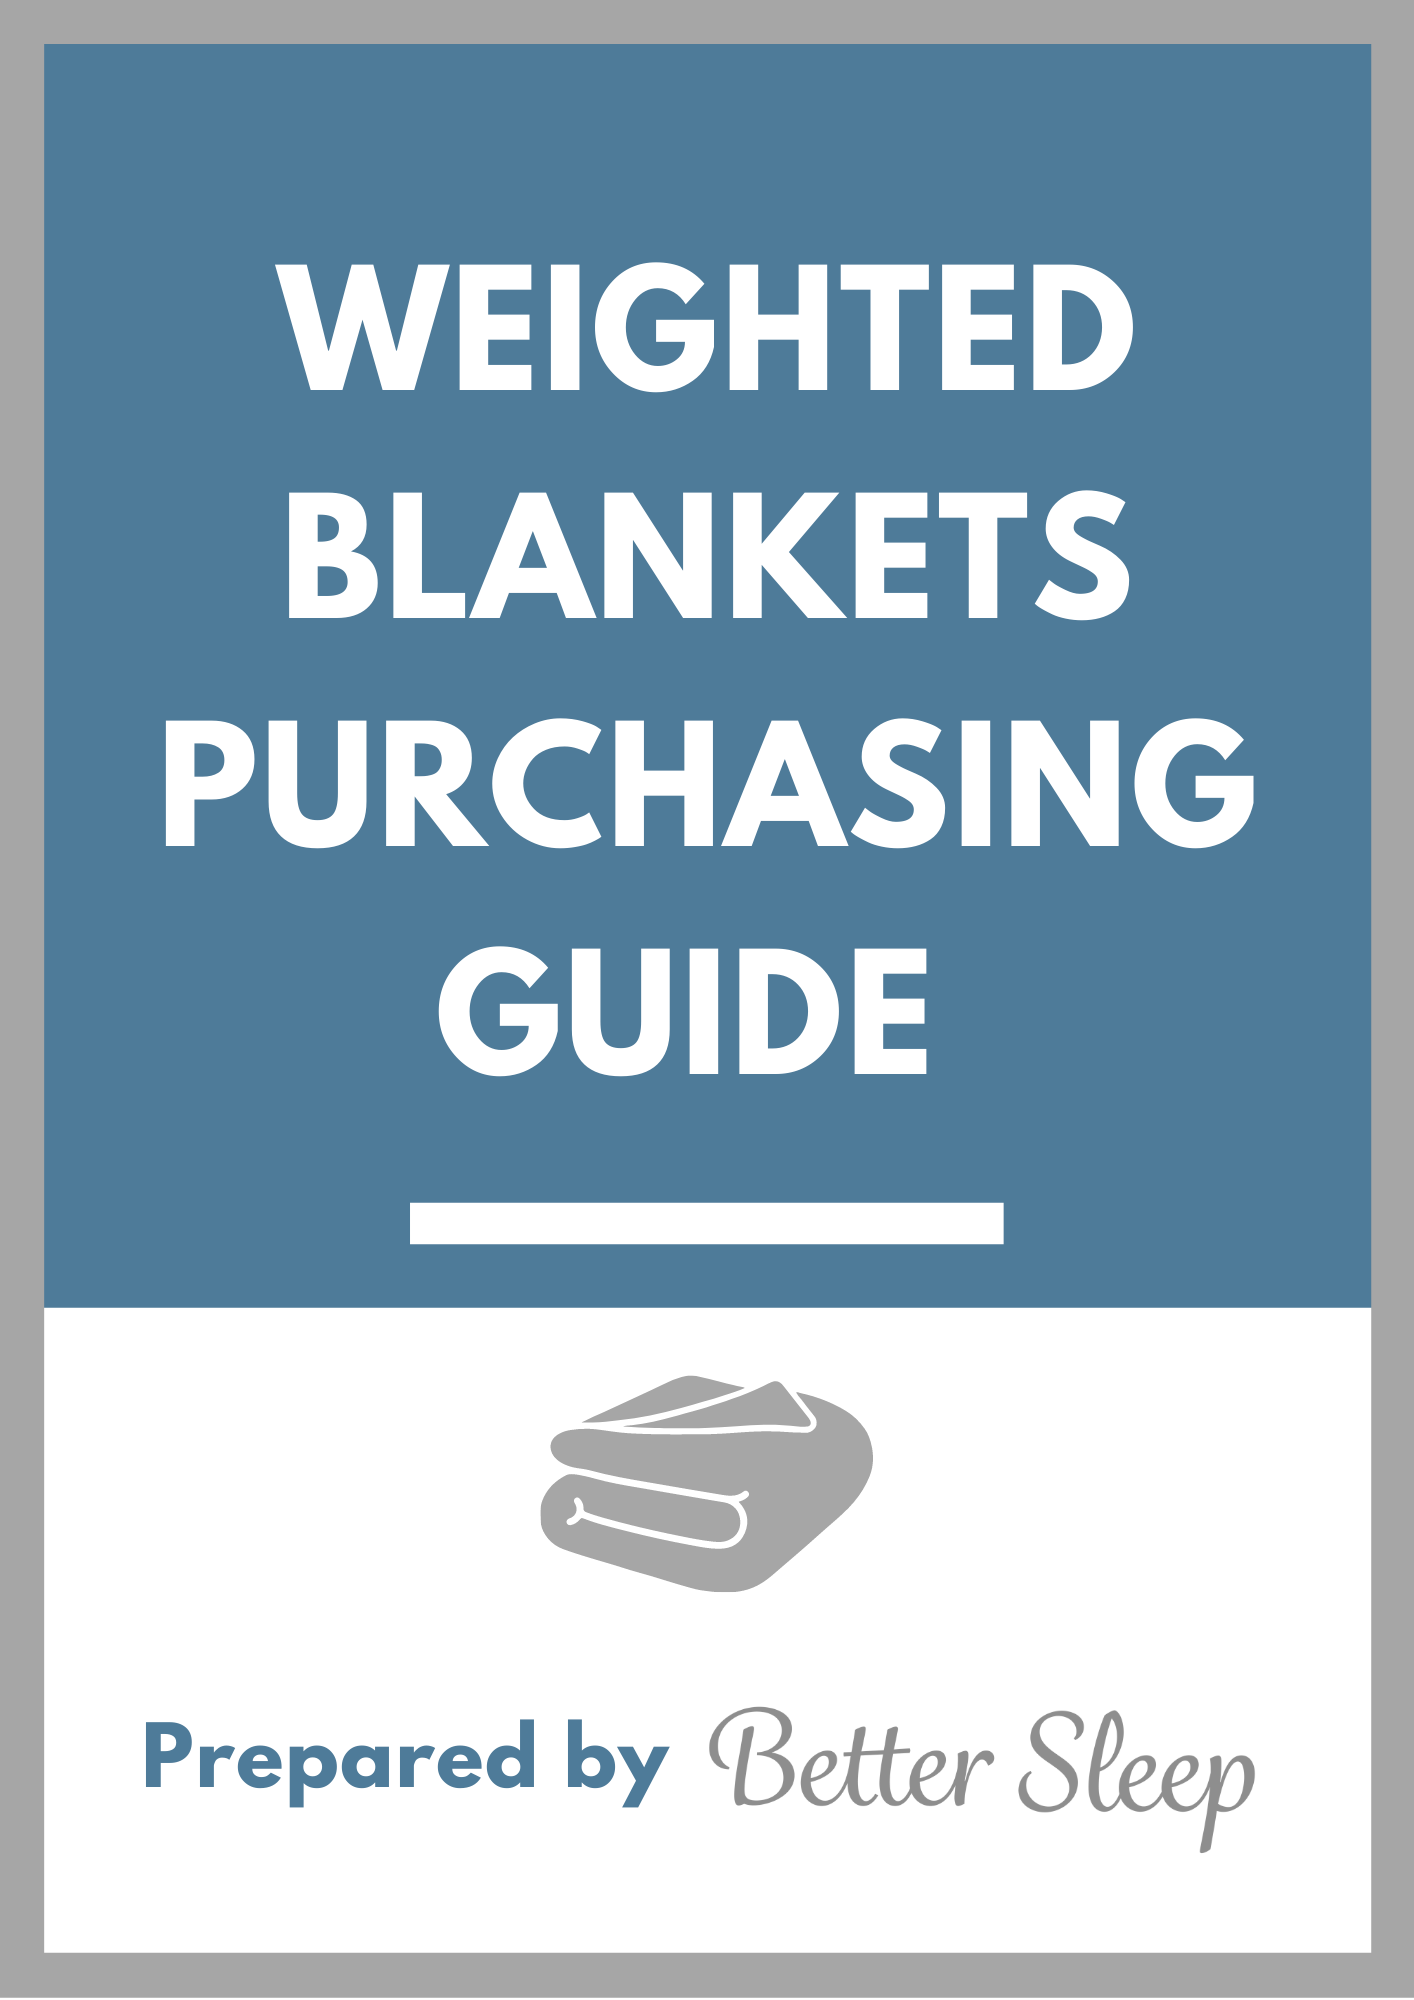 WEIGHTED BLANKETS GUIDES